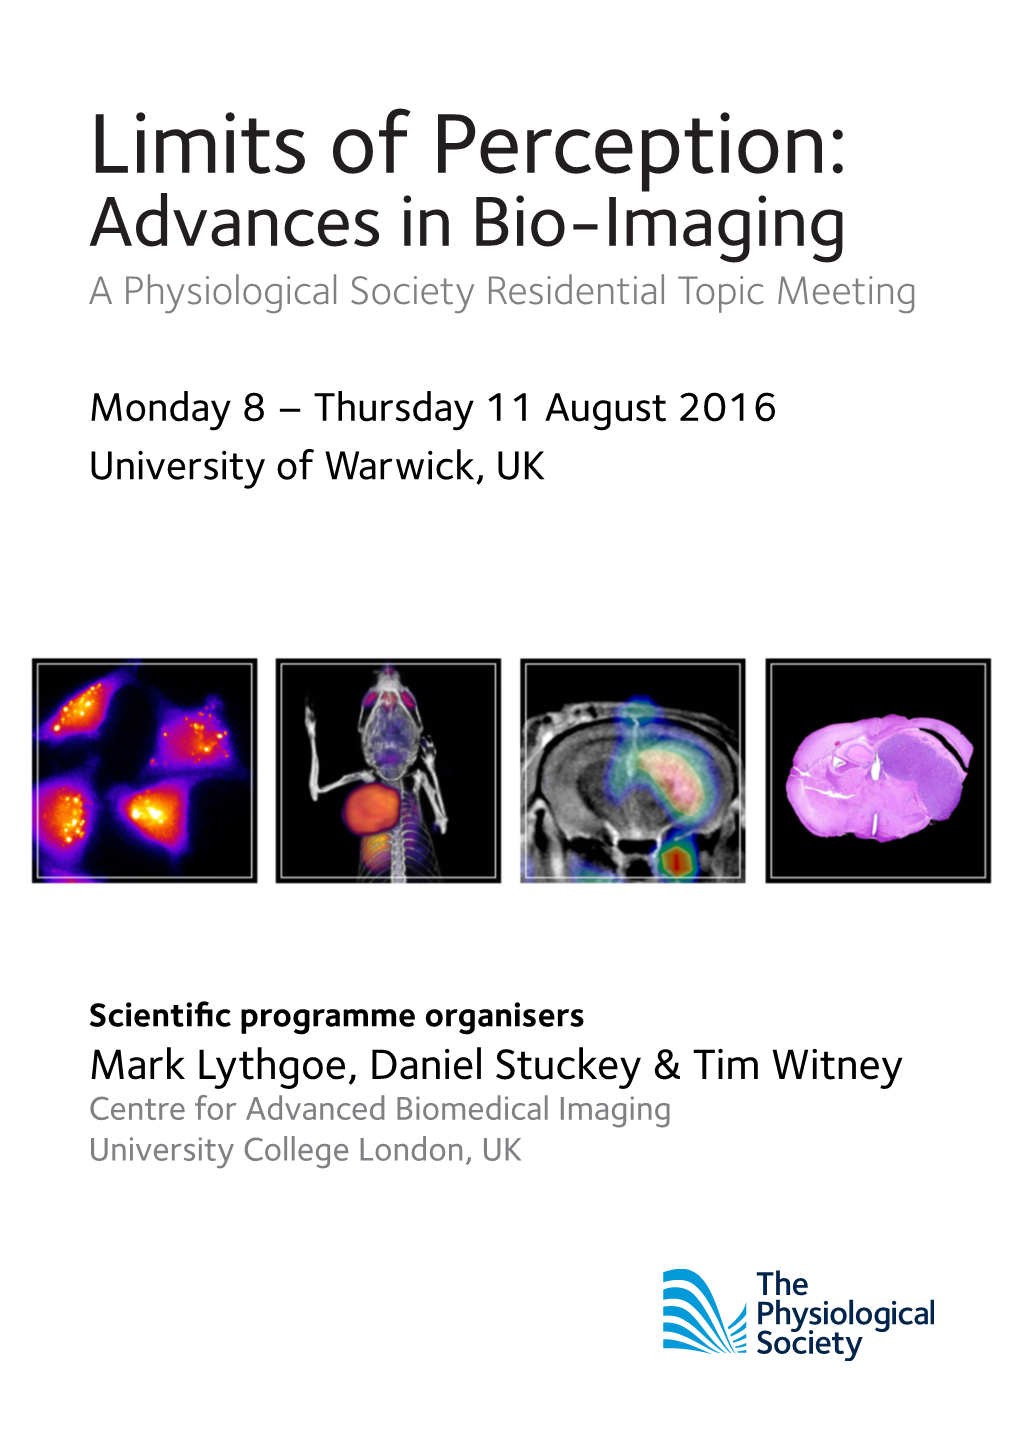 Limits of Perception: Advances in Bio-Imaging a Physiological Society Residential Topic Meeting